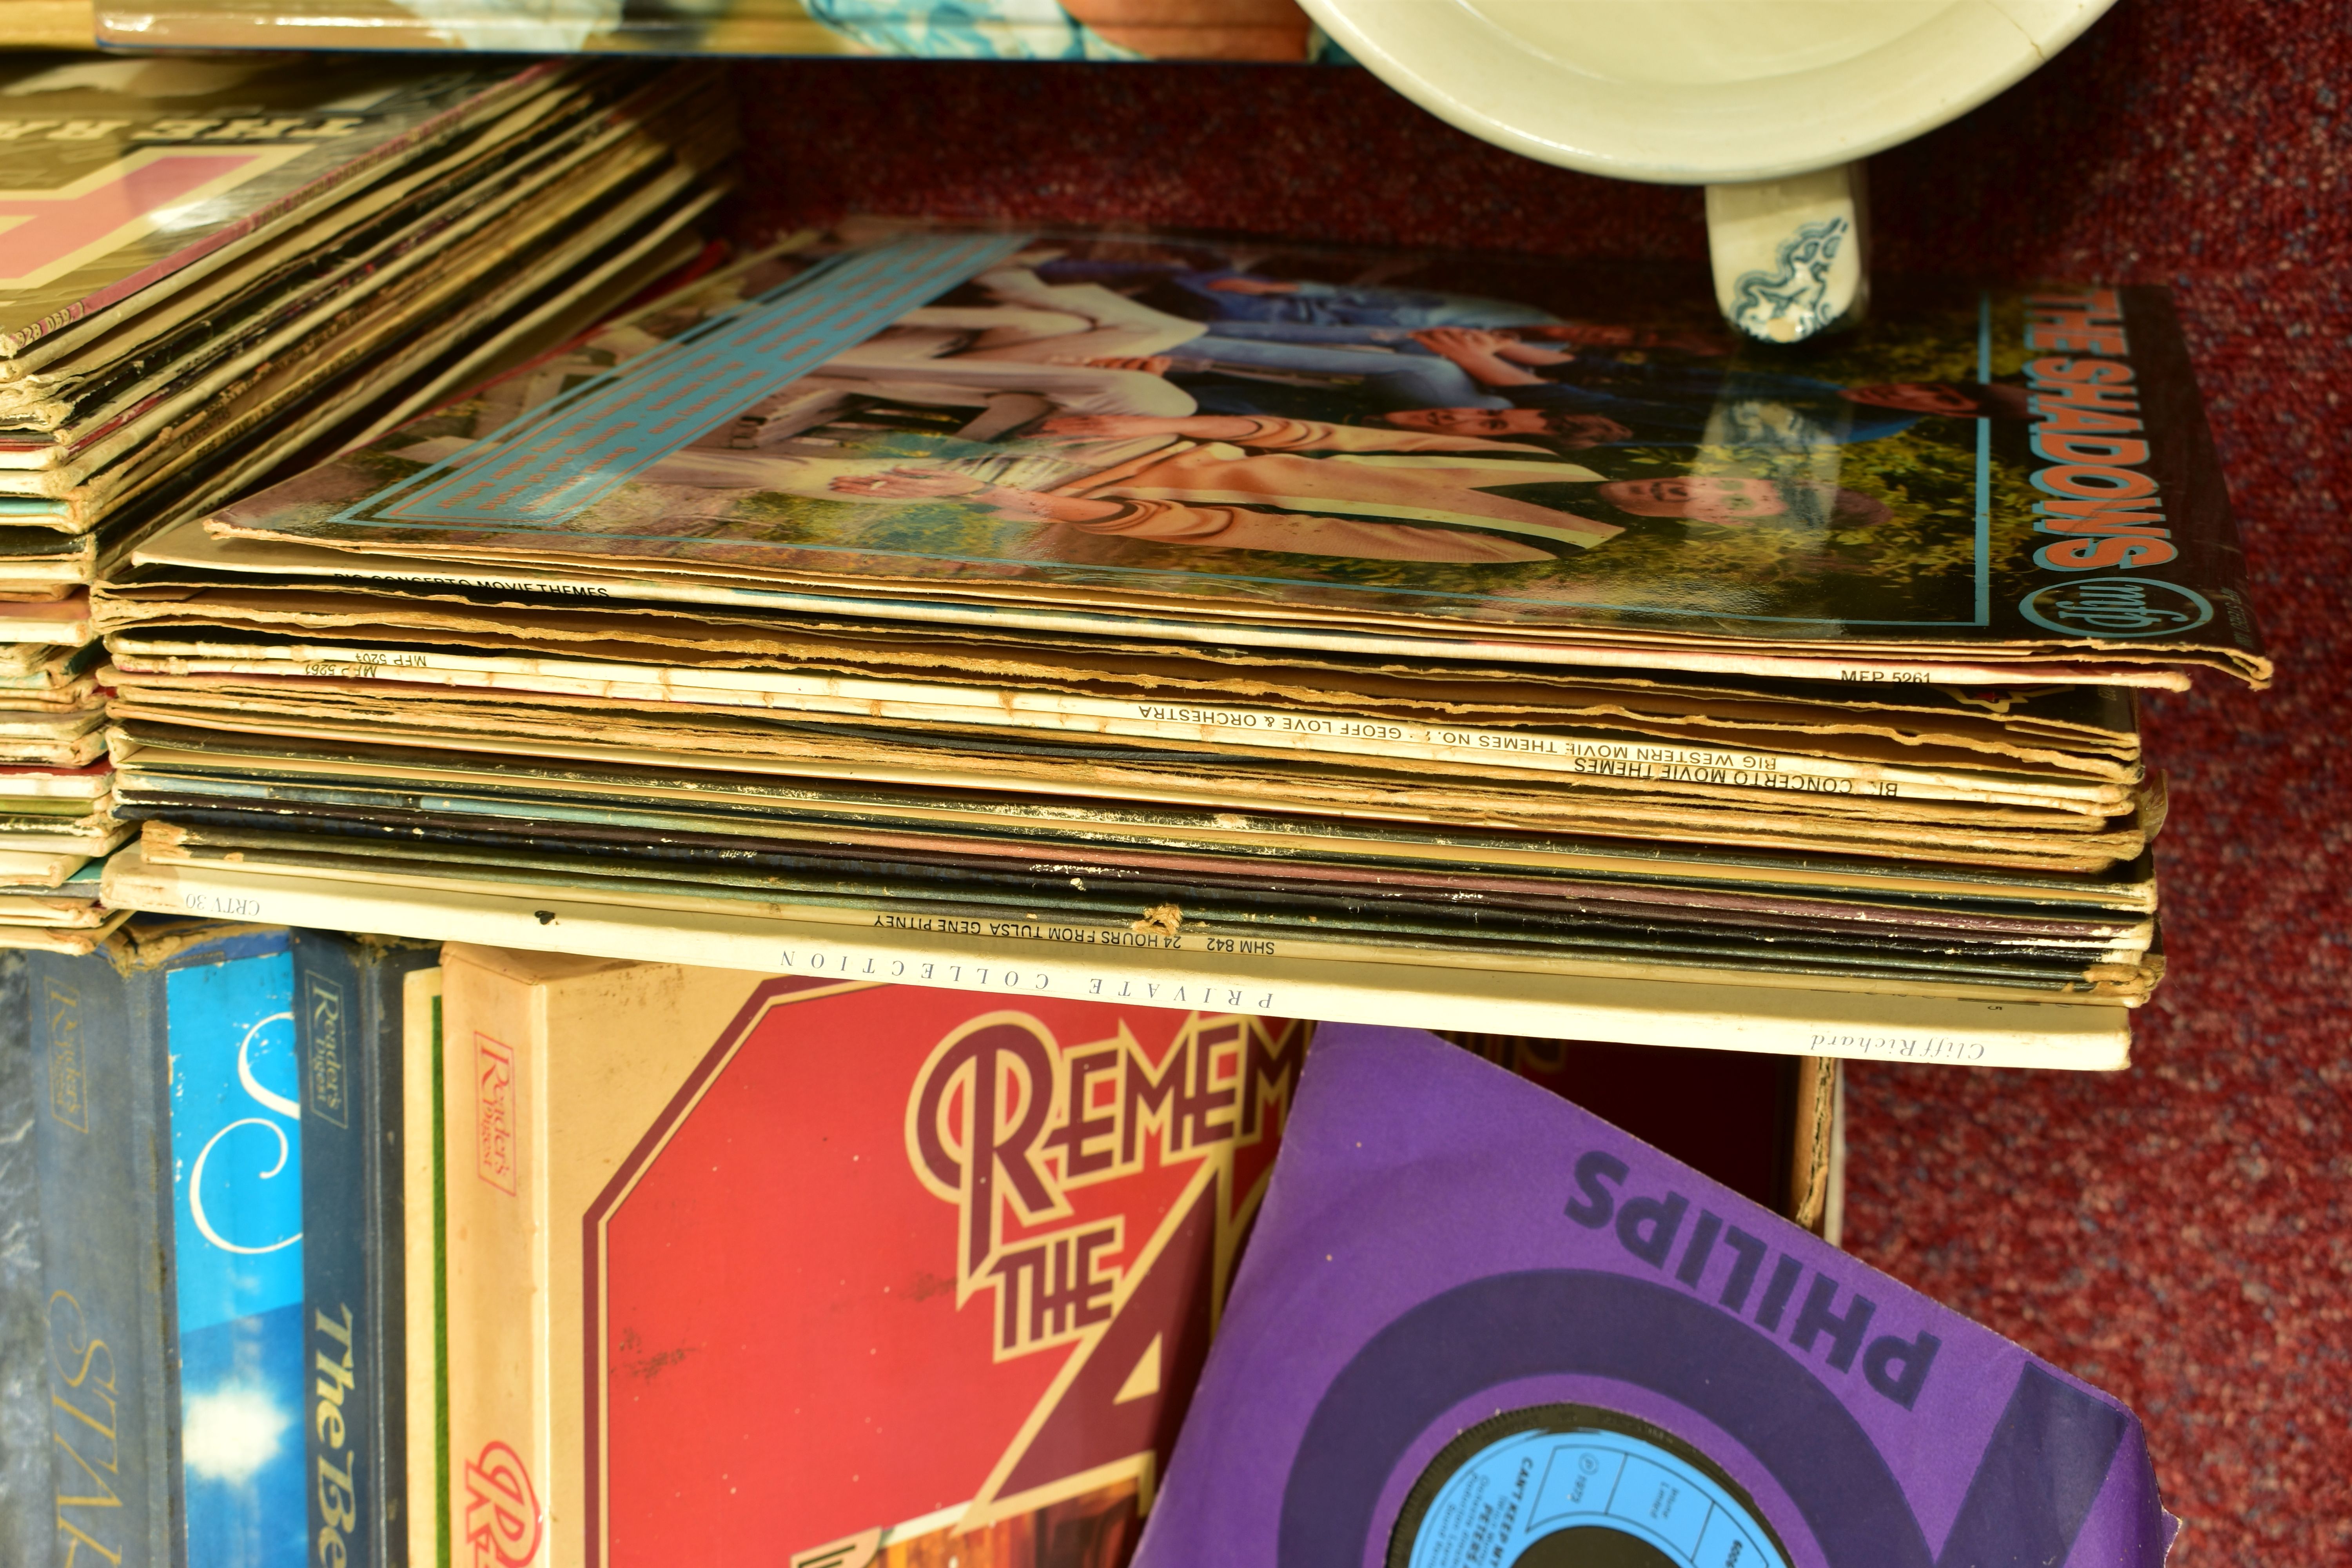 A TRAY CONTAINING LPs, 78s AND BOXSETS of Classical and Easy Listening music along with a Royal - Bild 4 aus 6